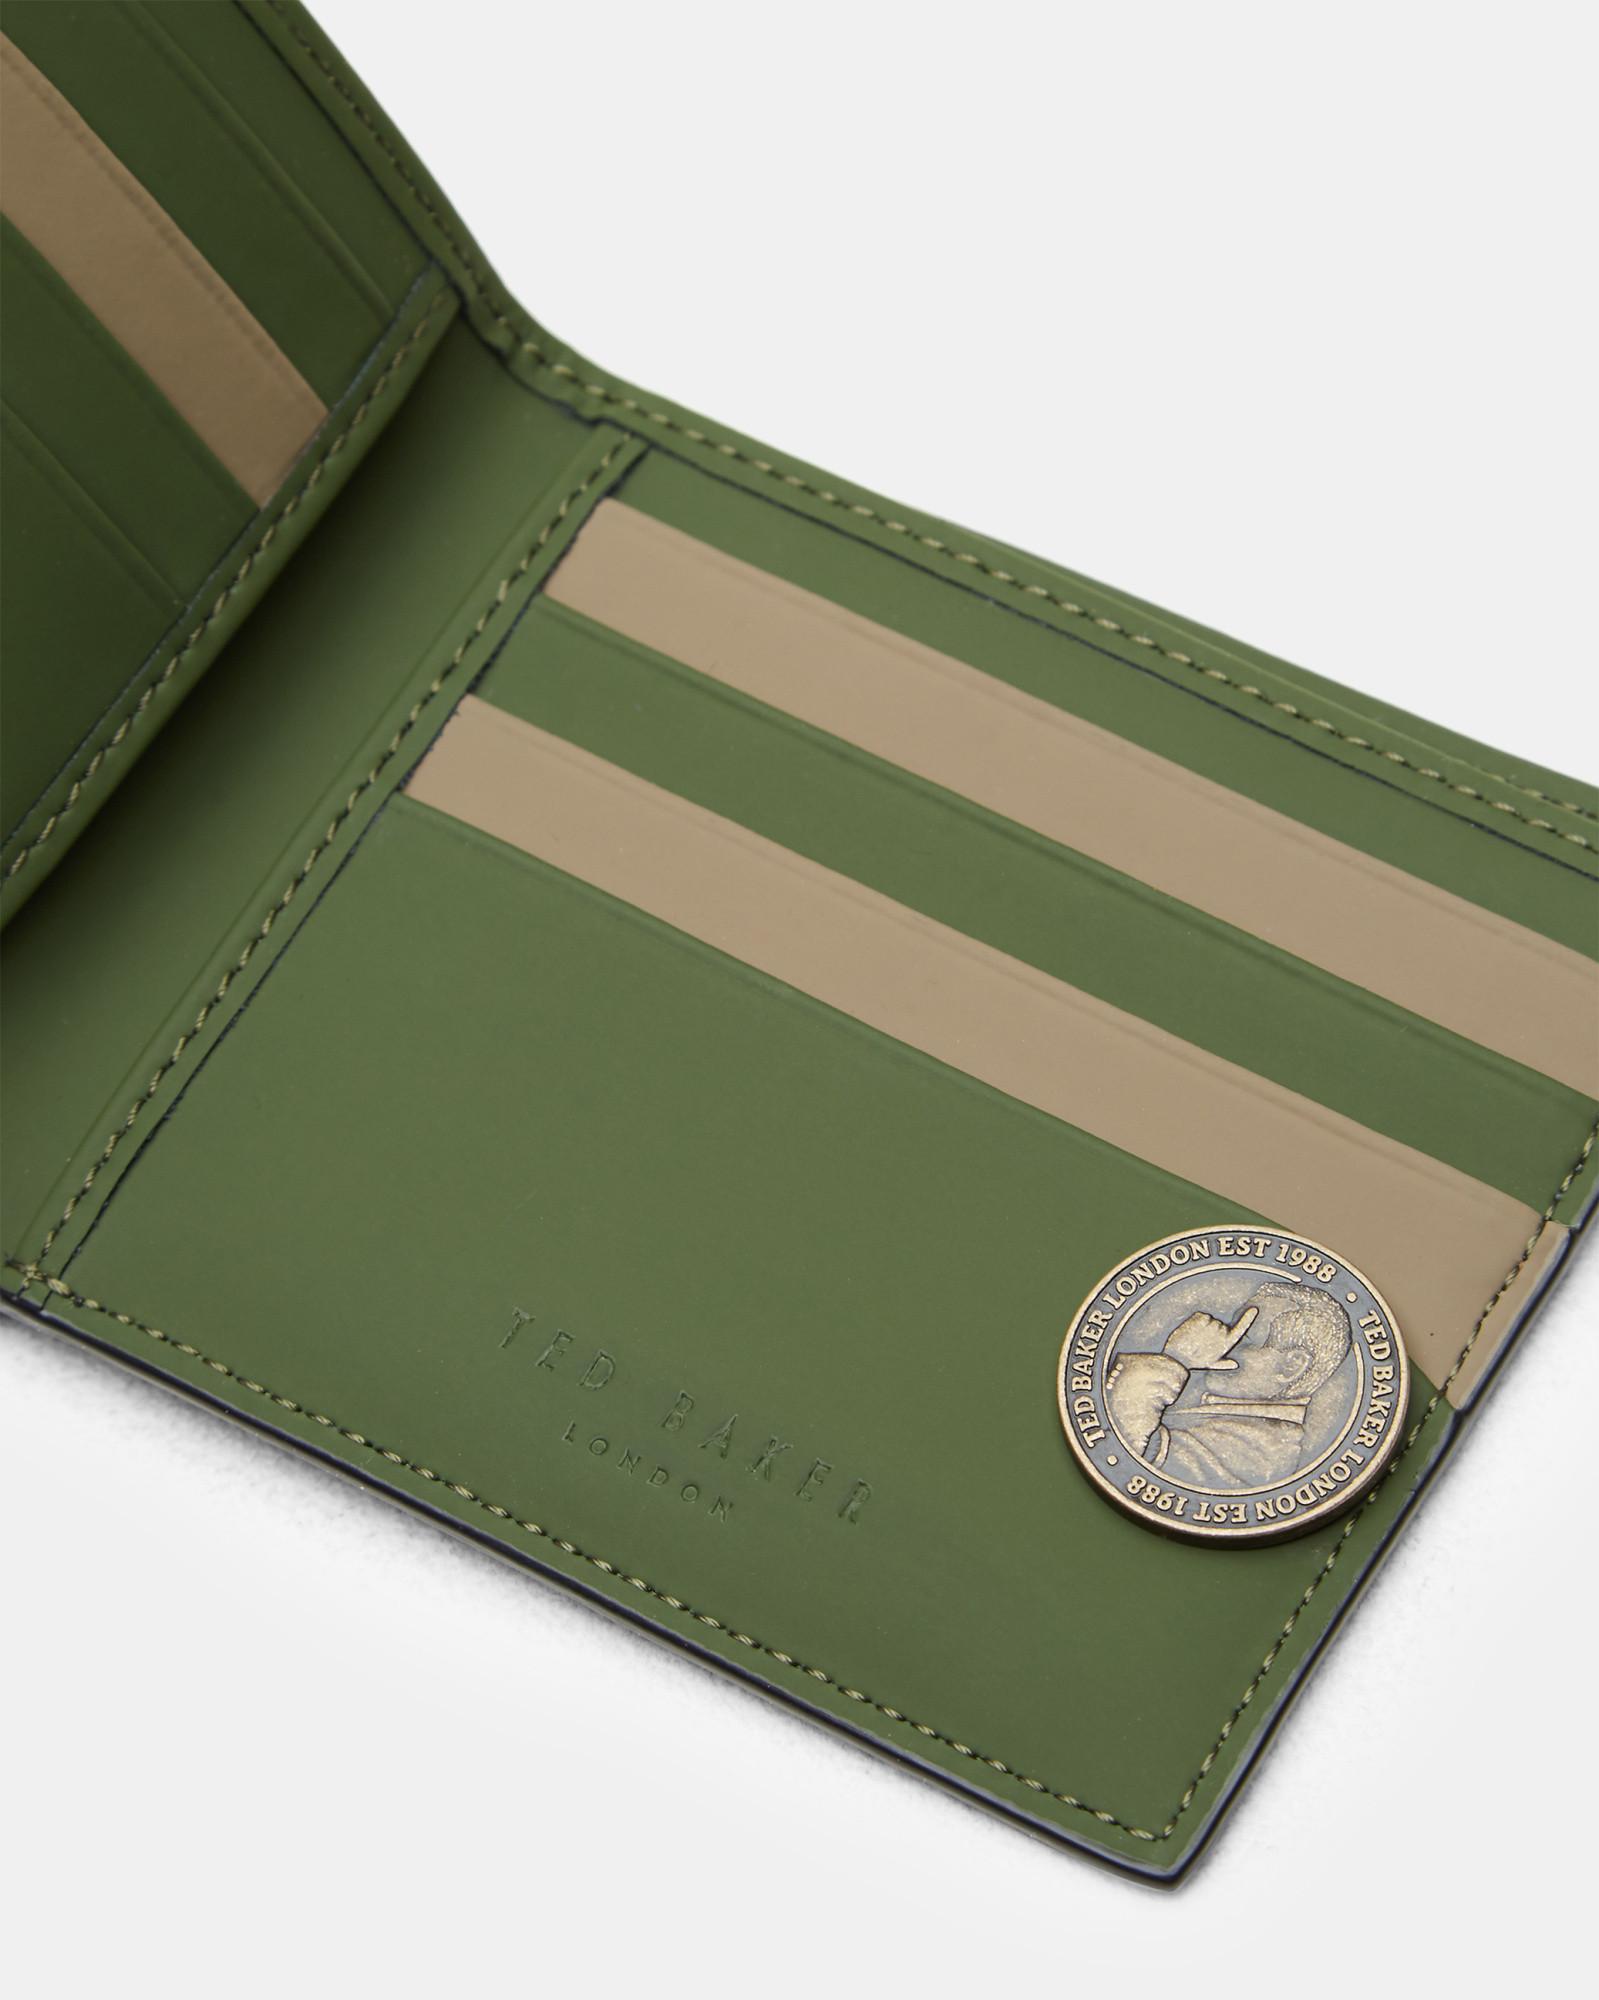 Ted Baker Leather Wallet in Green for Men - Lyst